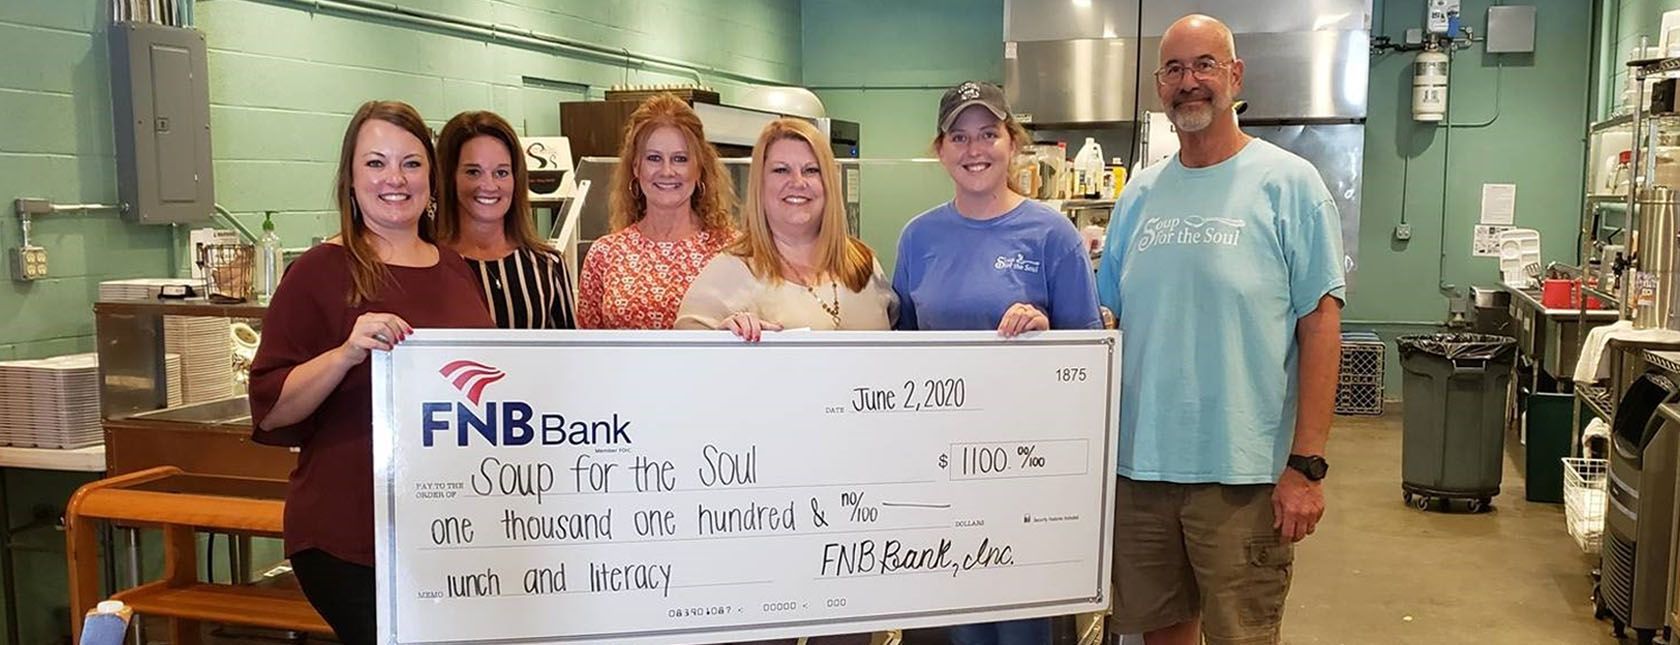 FNB Donates $1,100 to Soup for the Soul's Lunch and Literacy Program